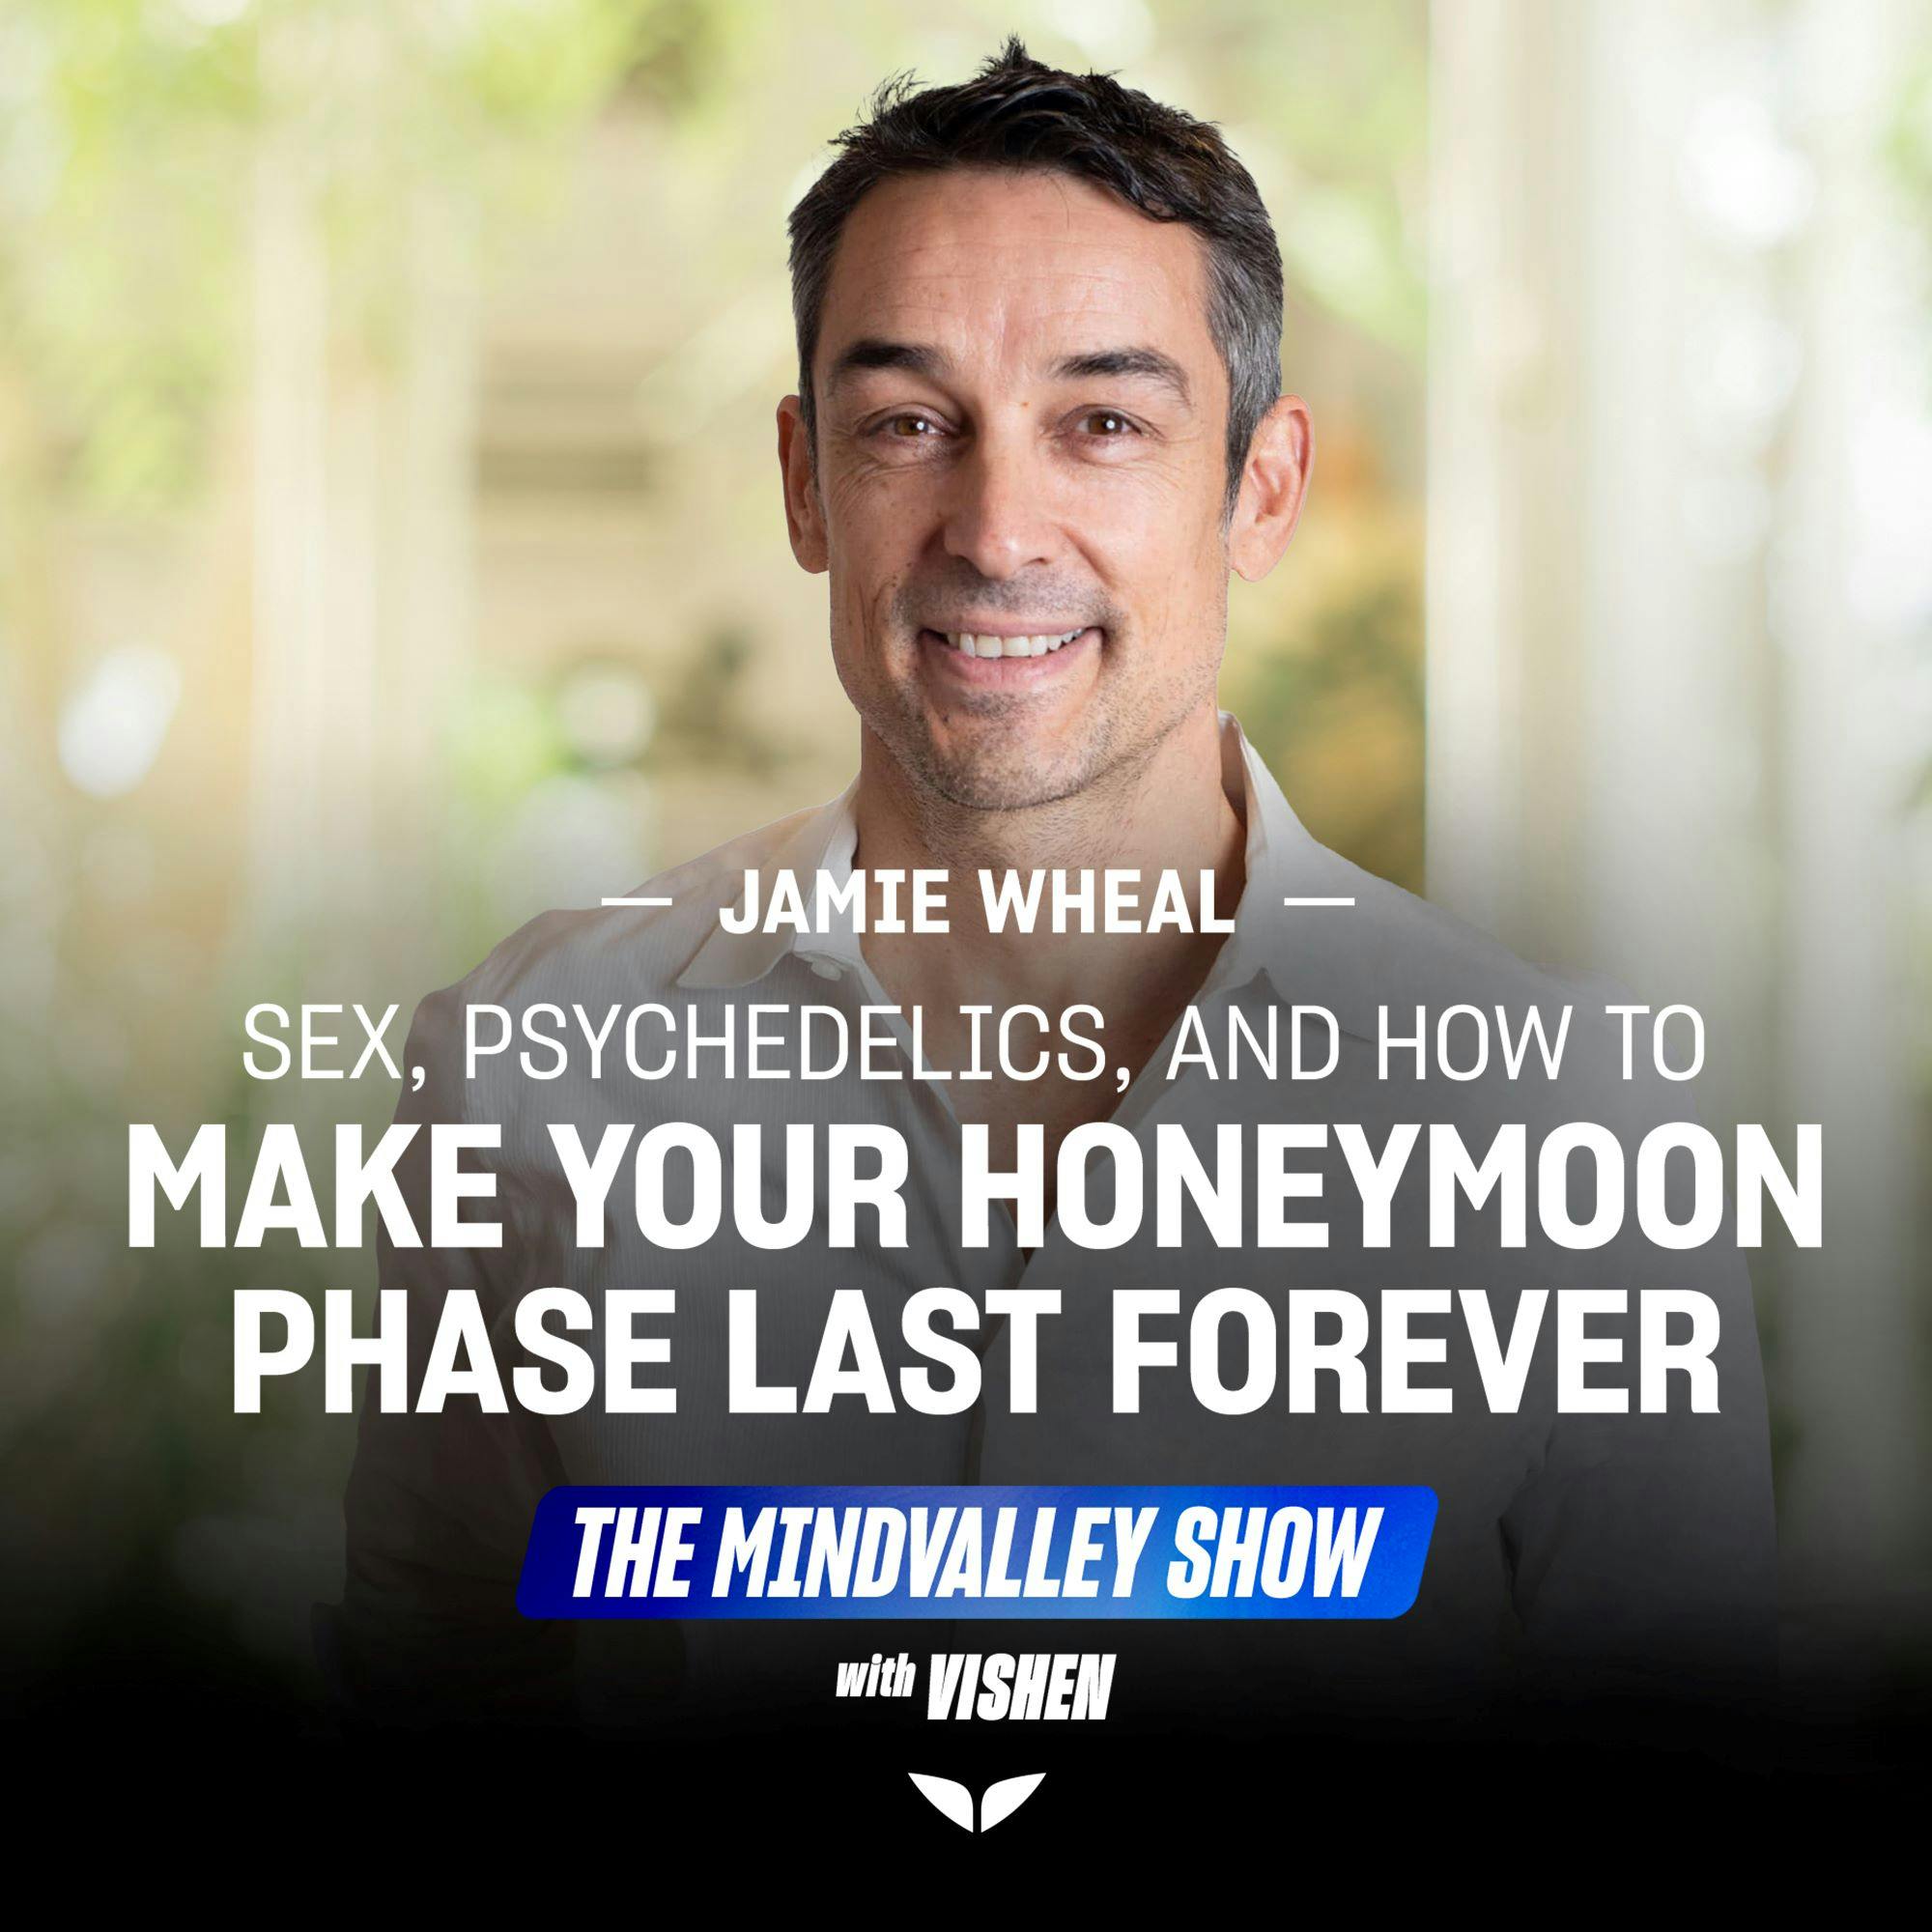 Sex, Psychedelics, and How to Make Your Honeymoon Phase Last Forever